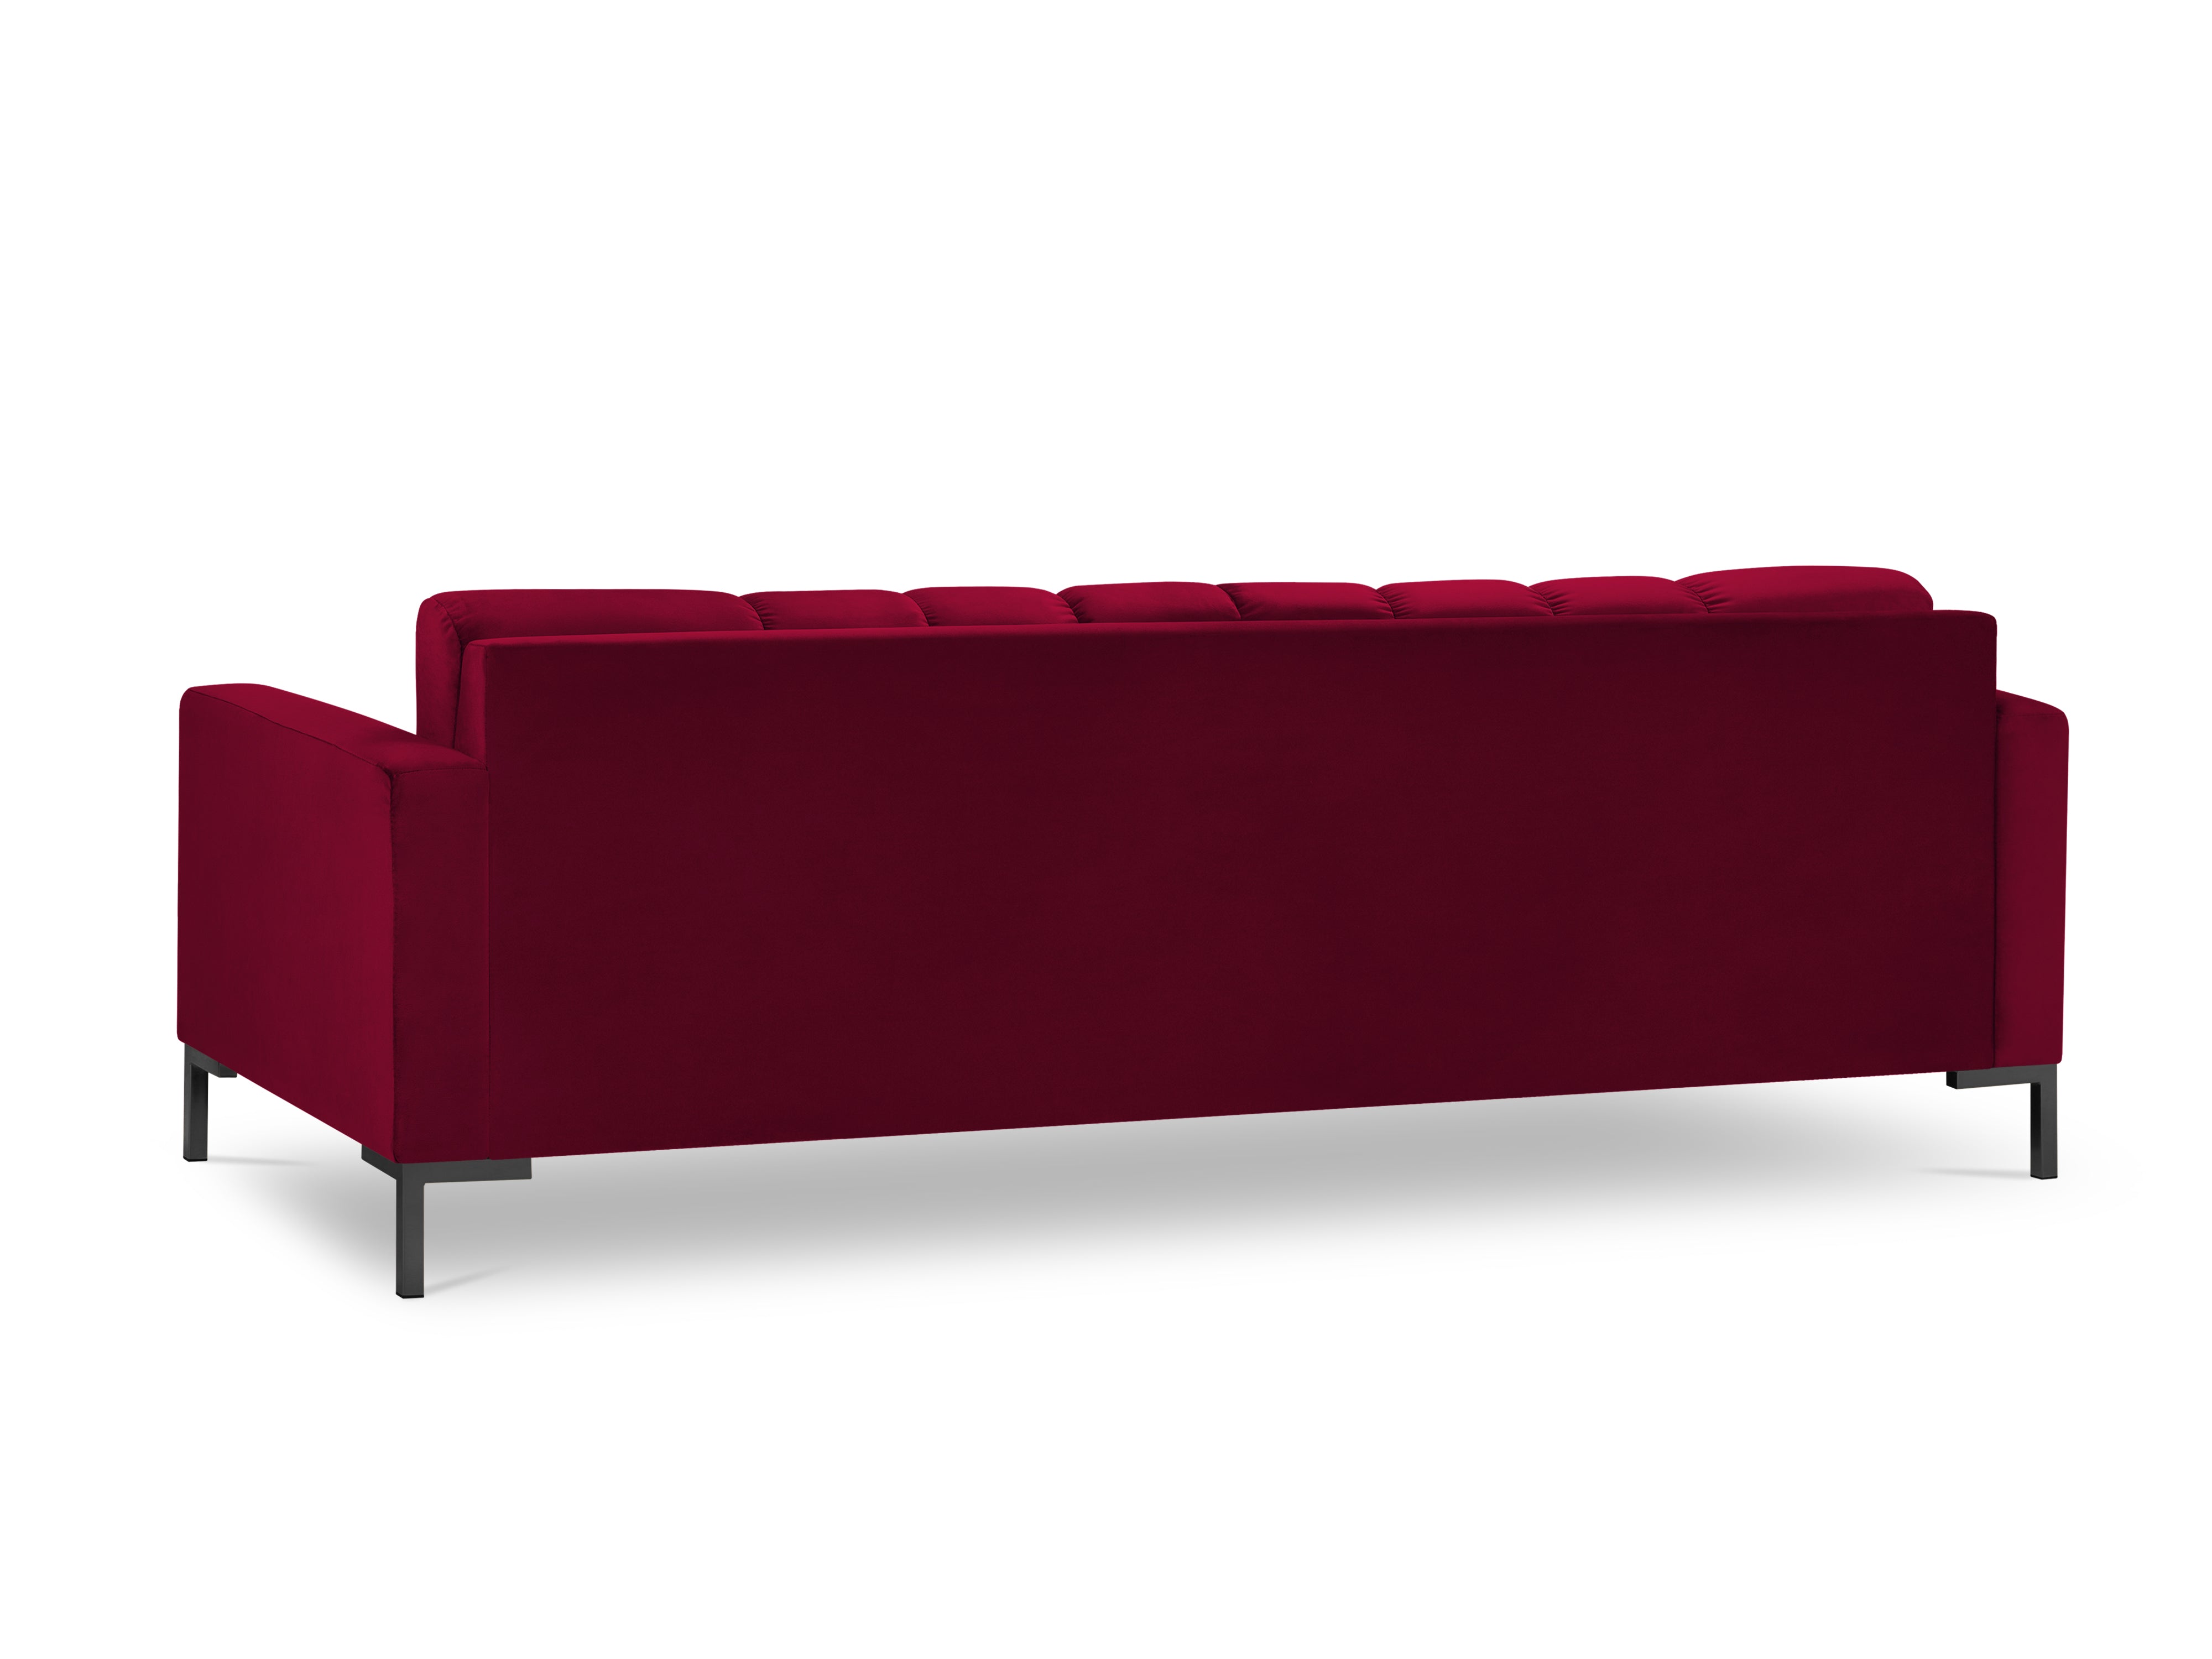 Red sofa with a black base